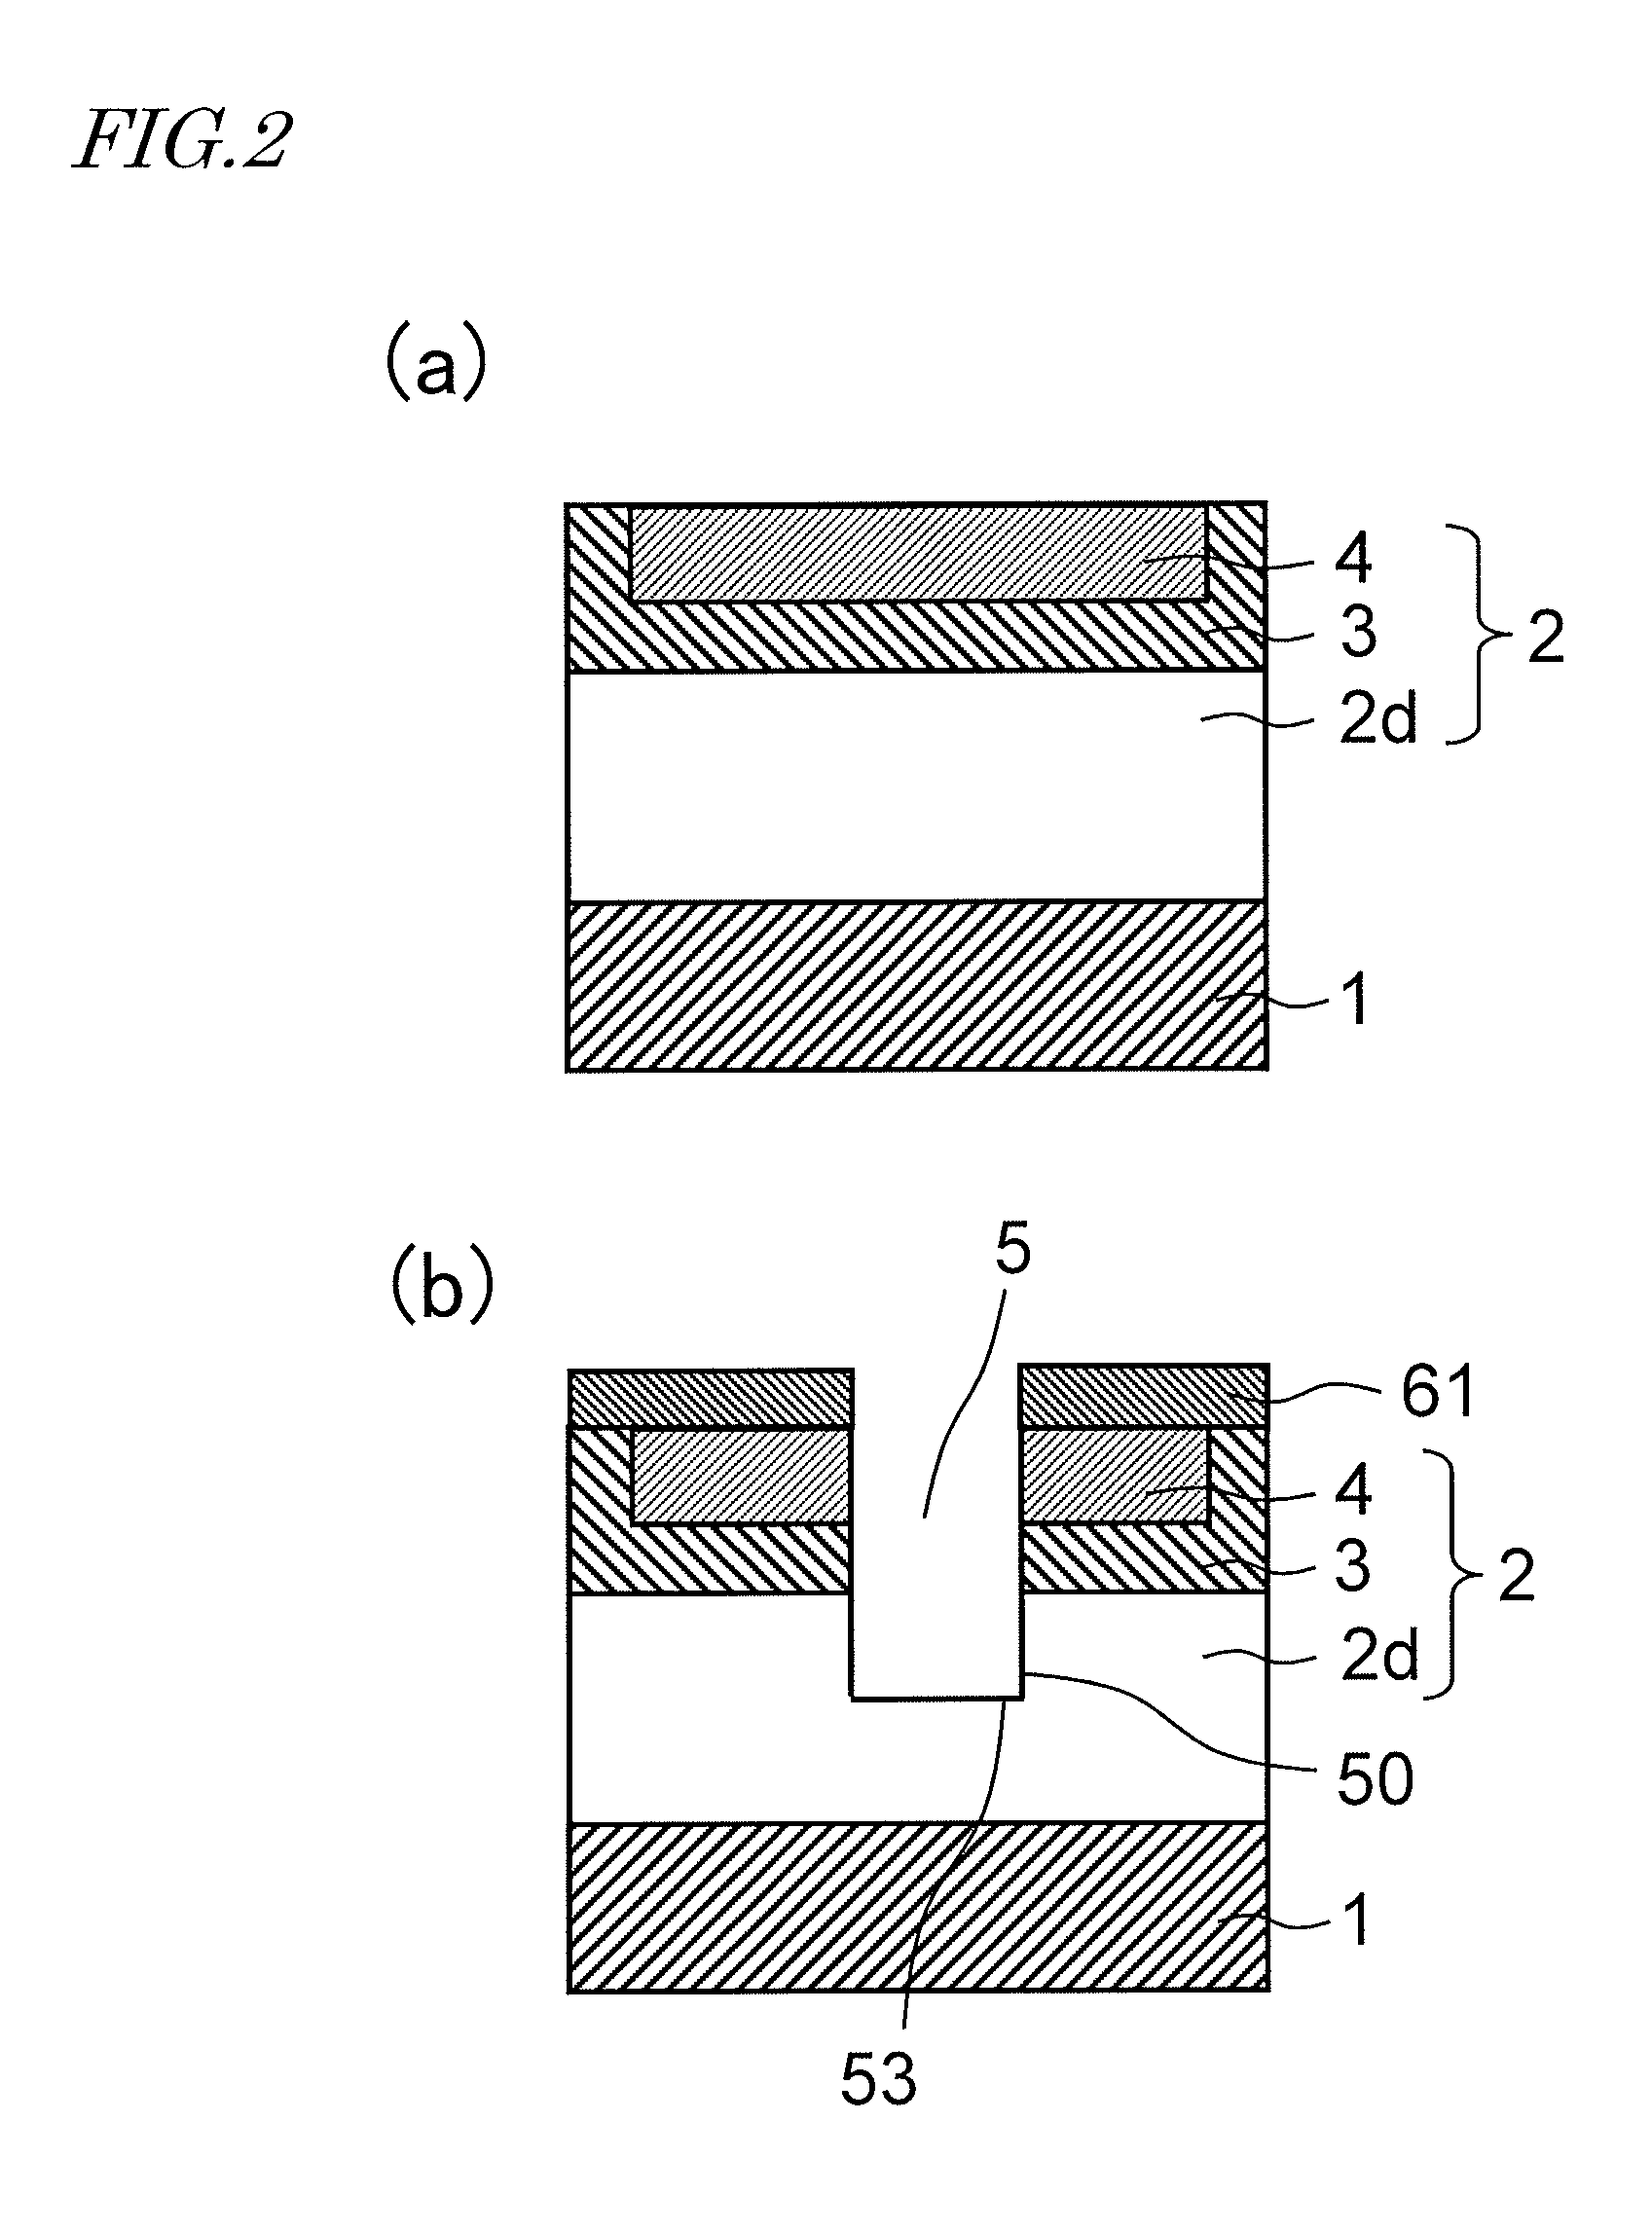 Silicon carbide semiconductor device and method for manufacturing same